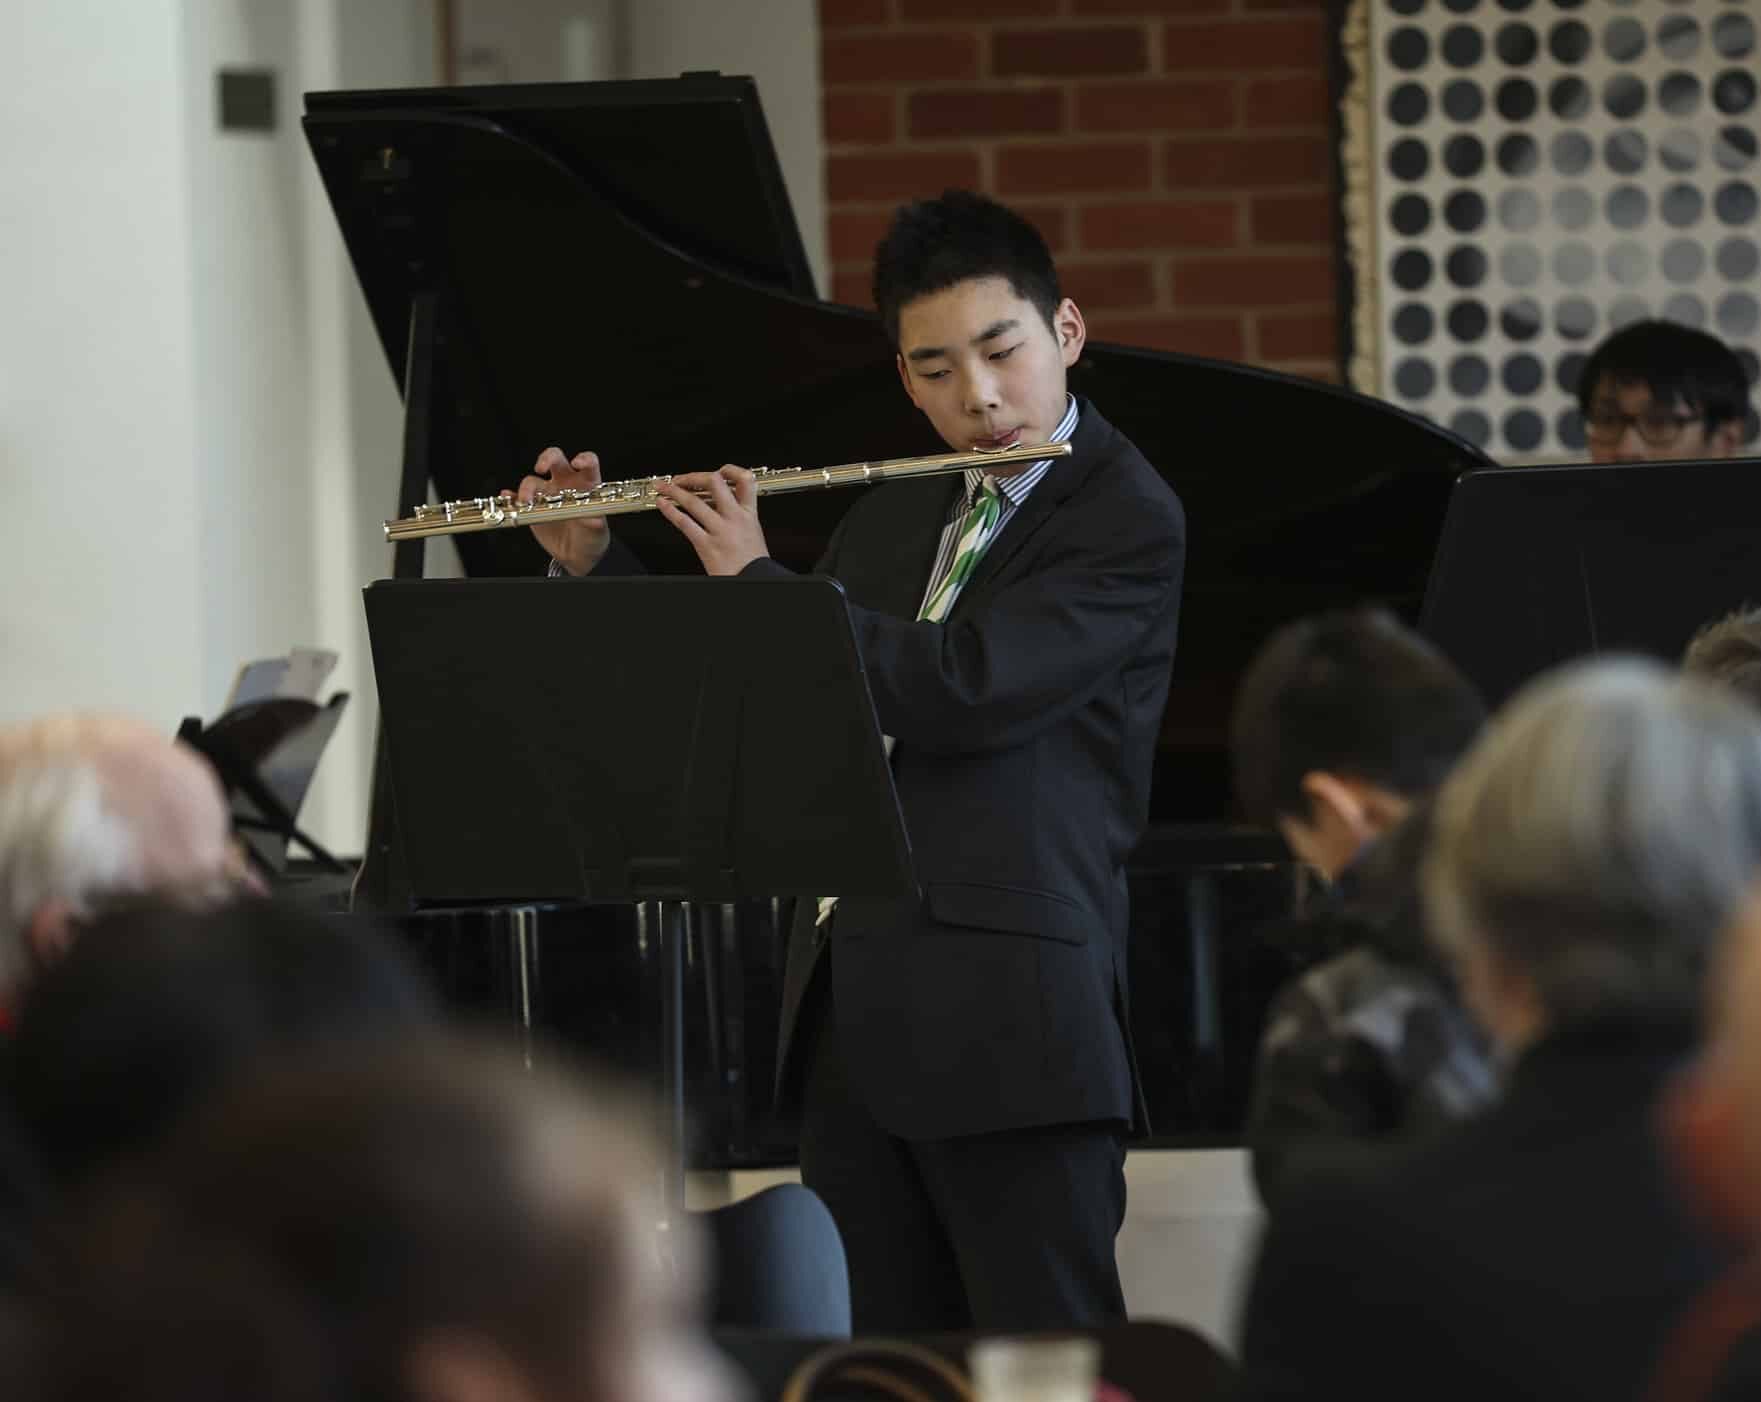 Boy plays the flute in a concert with grand piano in the background